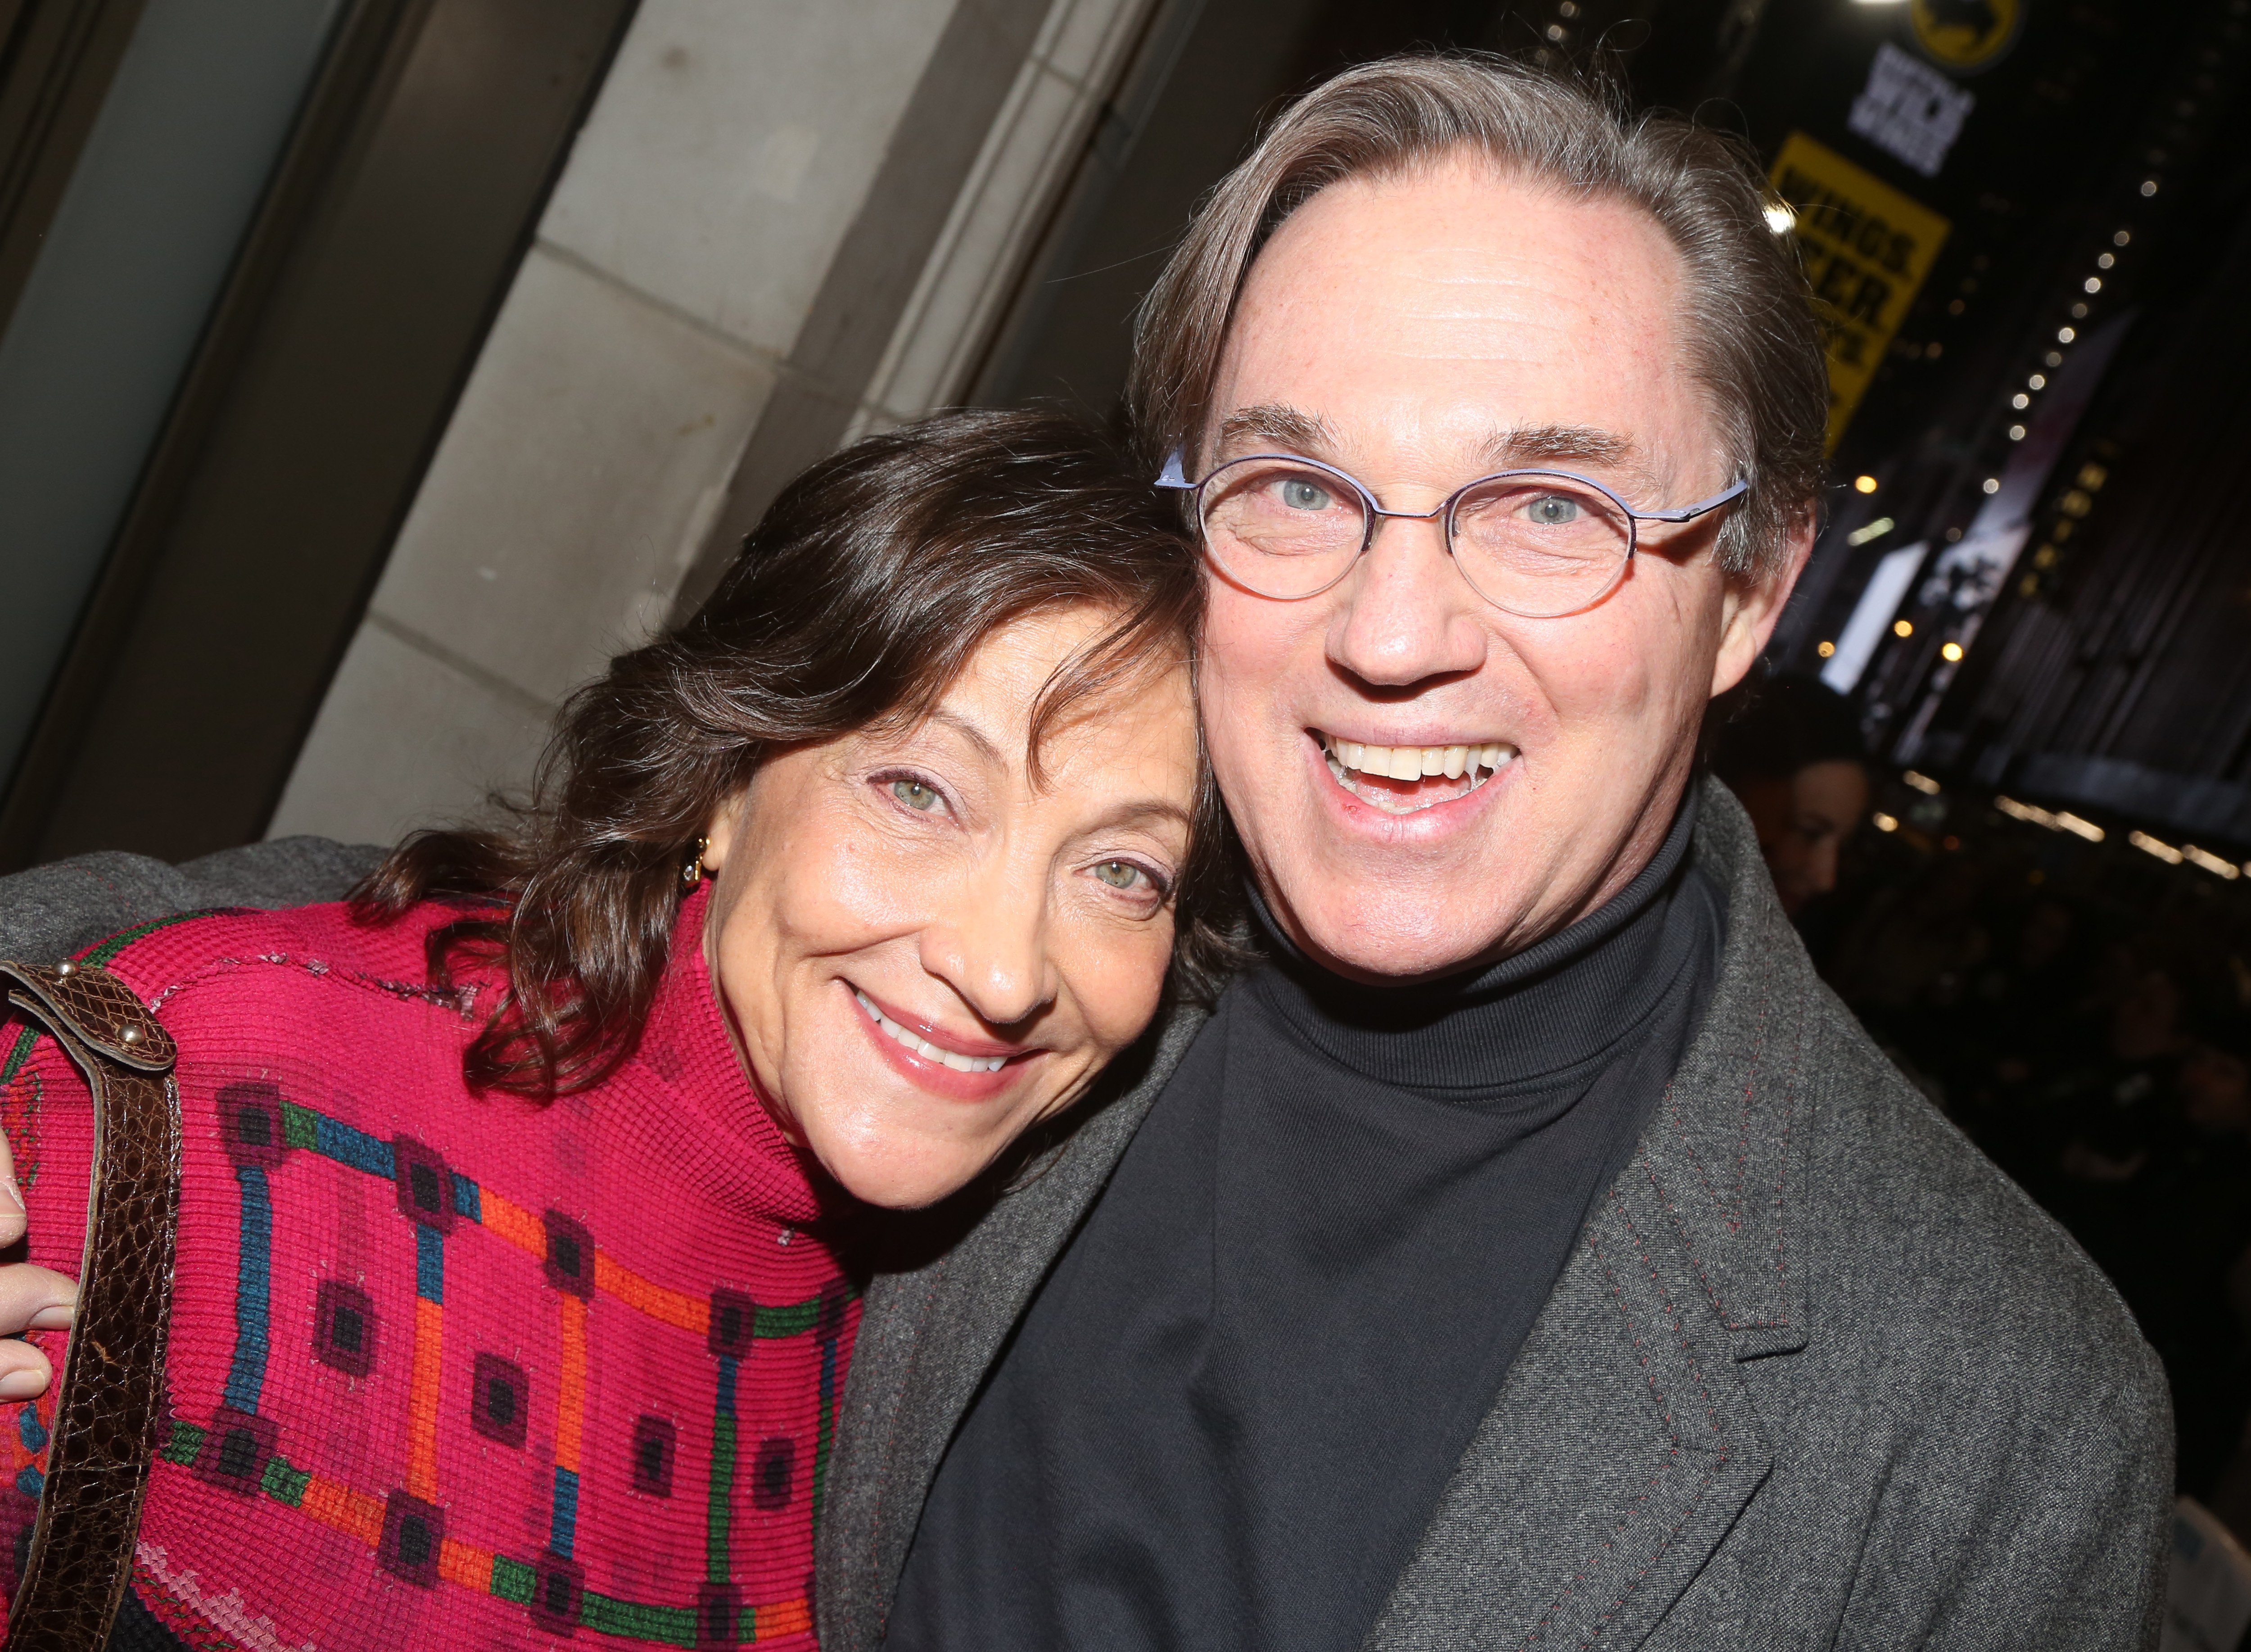 Georgiana Bischoff and her husband Richard Thomas at the opening night of "My Name Is Lucy Barton" on Broadway on January 15, 2020, in New York City | Source: Getty Images